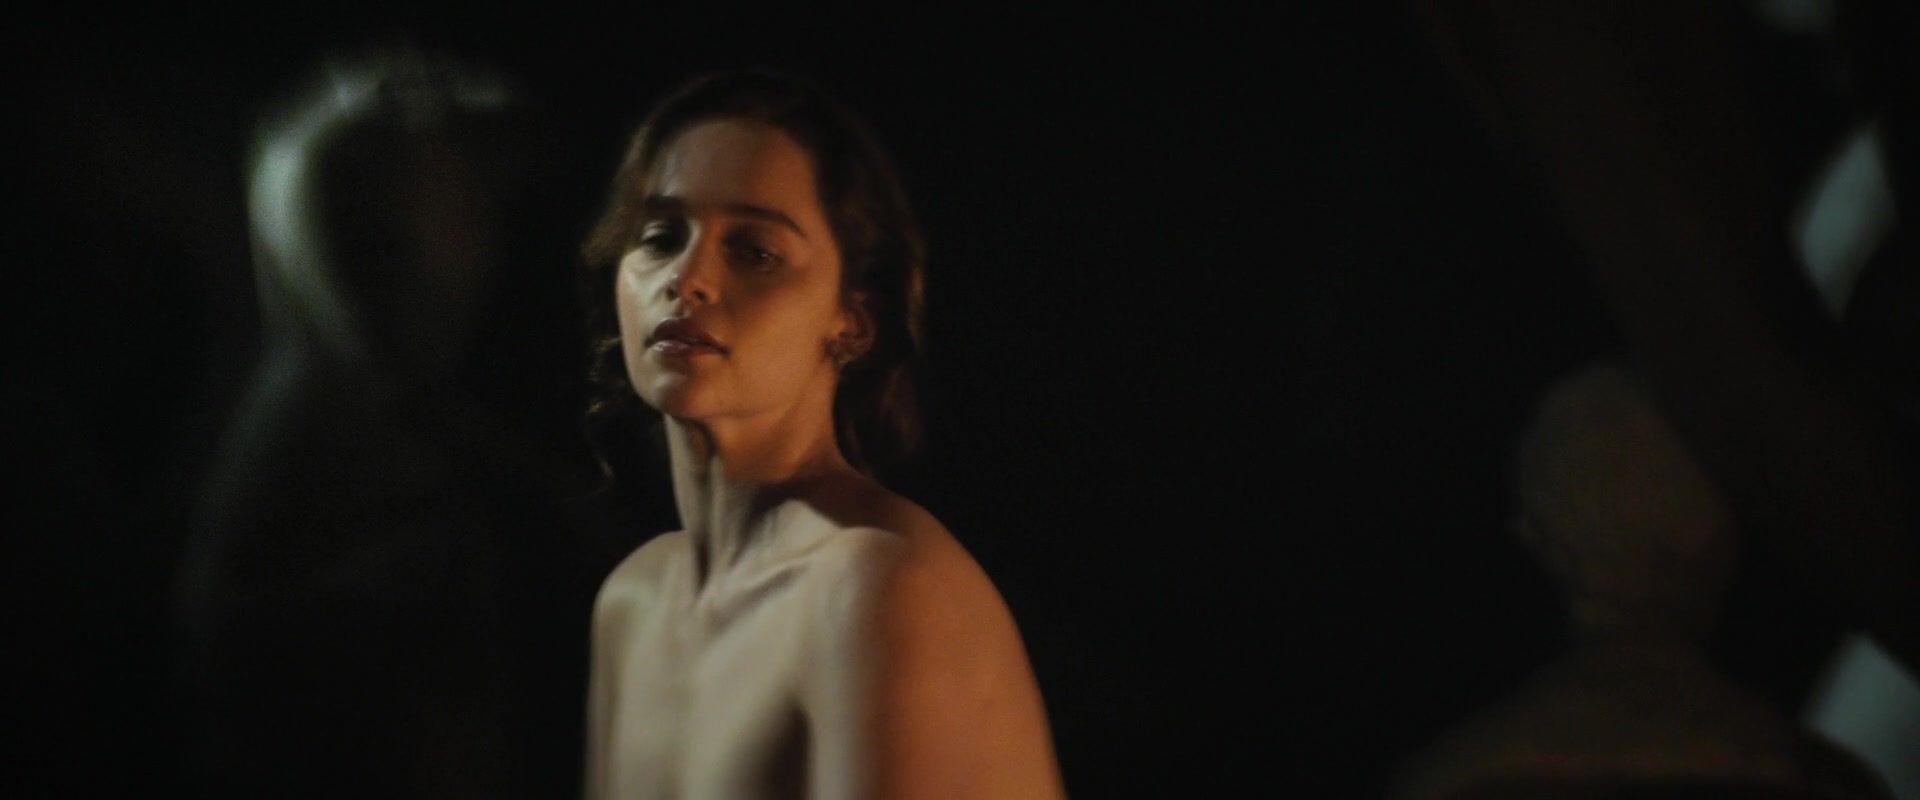 Free Blowjob Naked Emilia Clarke in topless scene of the movie "Voice from the Stone" | Released in 2017 Rubbing - 1